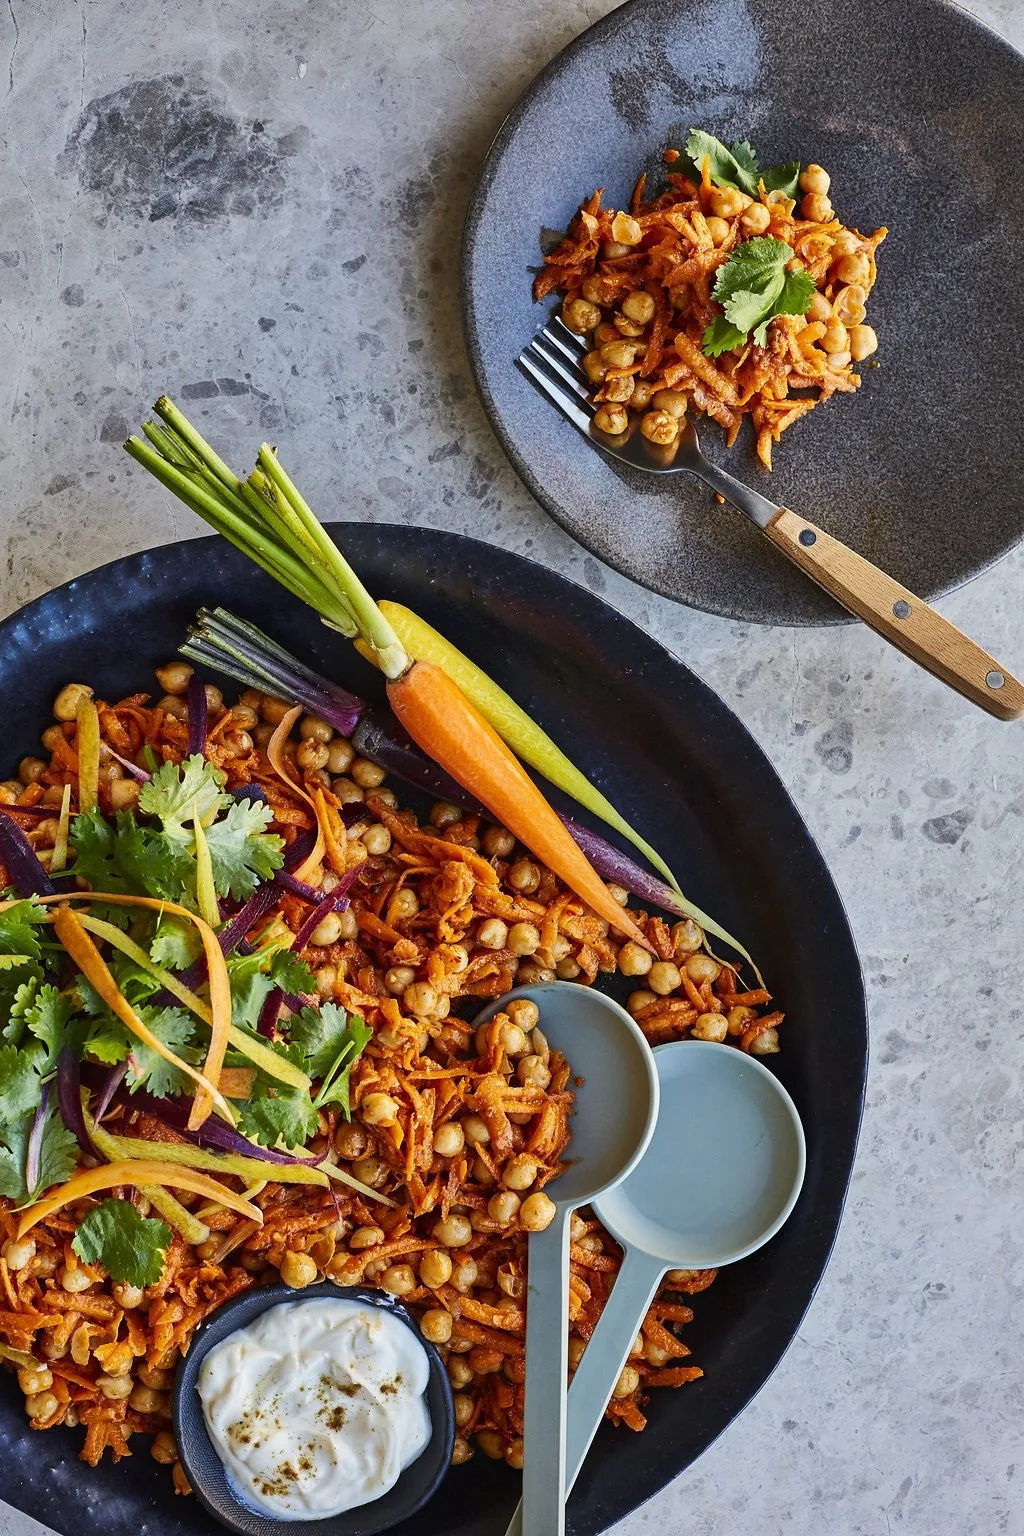 Carrot And Chickpea Salad With Harissa Paste